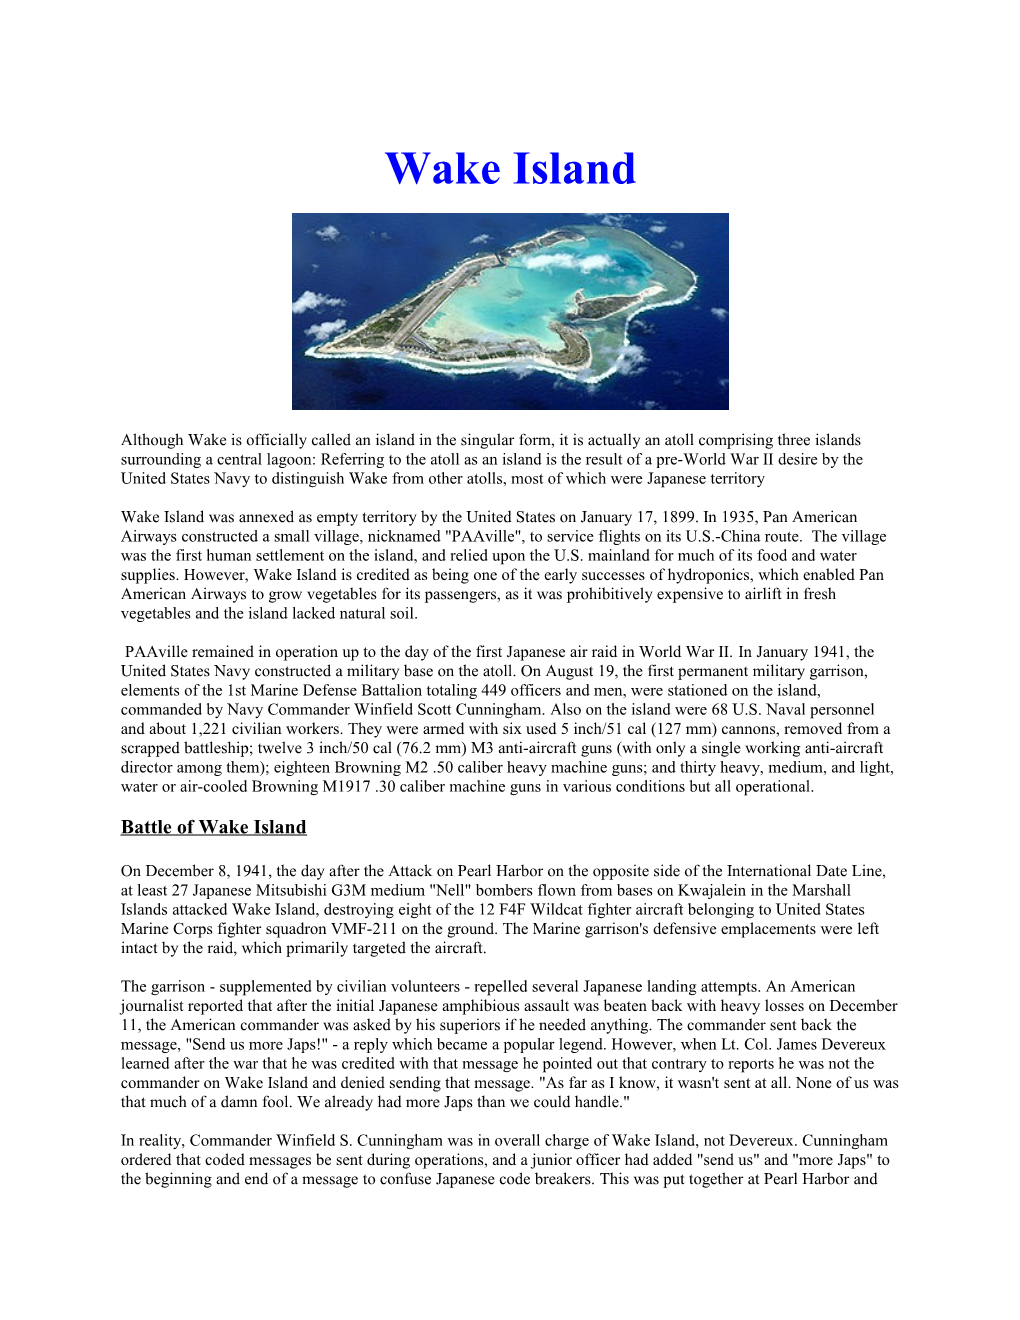 Although Wake Is Officially Called an Island in the Singular Form, It Is Actually an Atoll